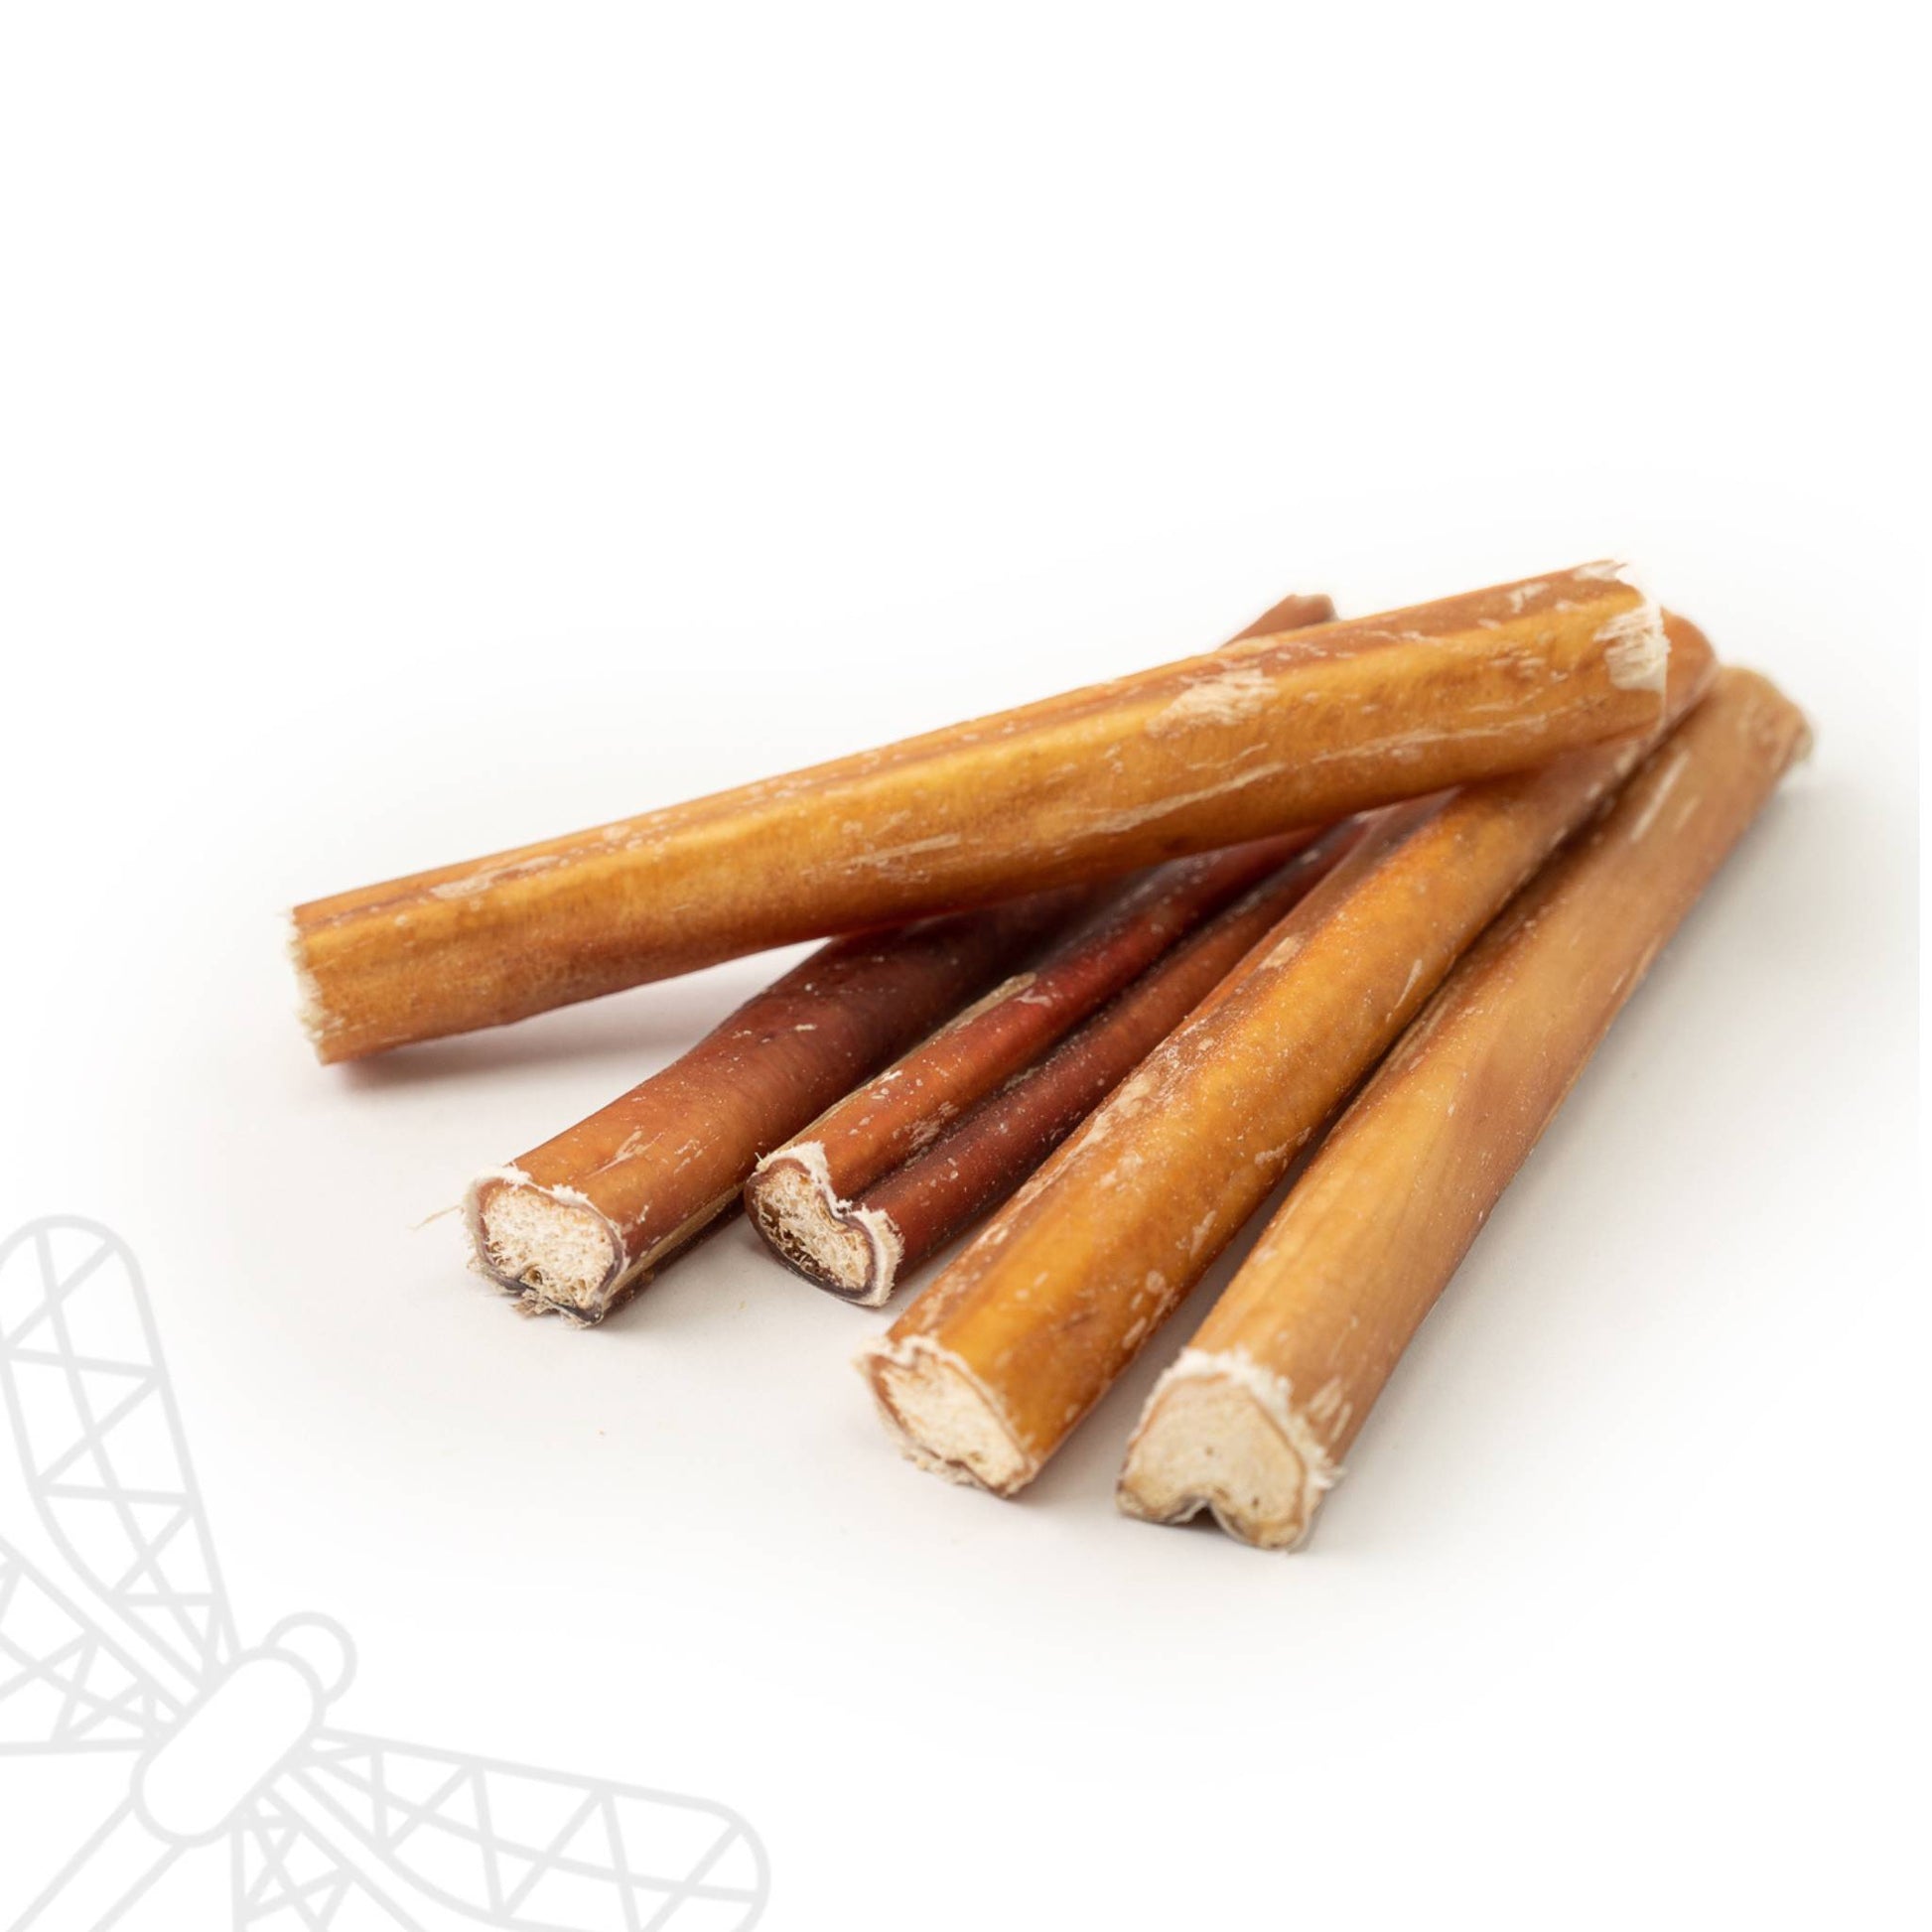 Imperfect bully sticks for dogs